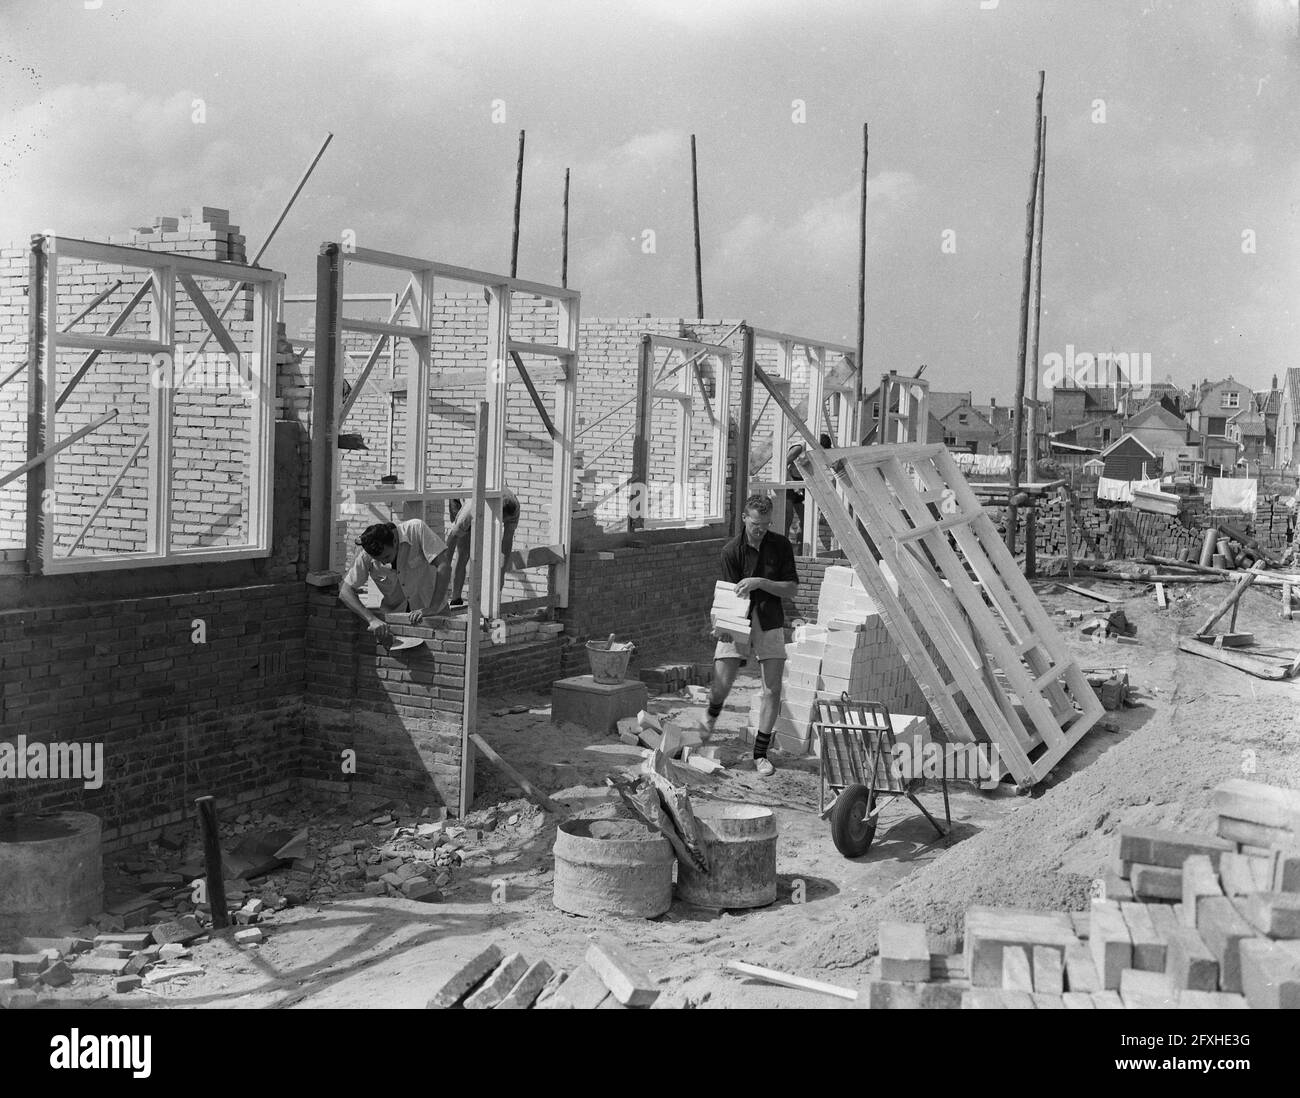 Volunteers including foreign youngsters help construction in Zeeland, at Nieuwerkerk Schouwen Duiveland, August 30, 1955, VOLUNTEERS, The Netherlands, 20th century press agency photo, news to remember, documentary, historic photography 1945-1990, visual stories, human history of the Twentieth Century, capturing moments in time Stock Photo